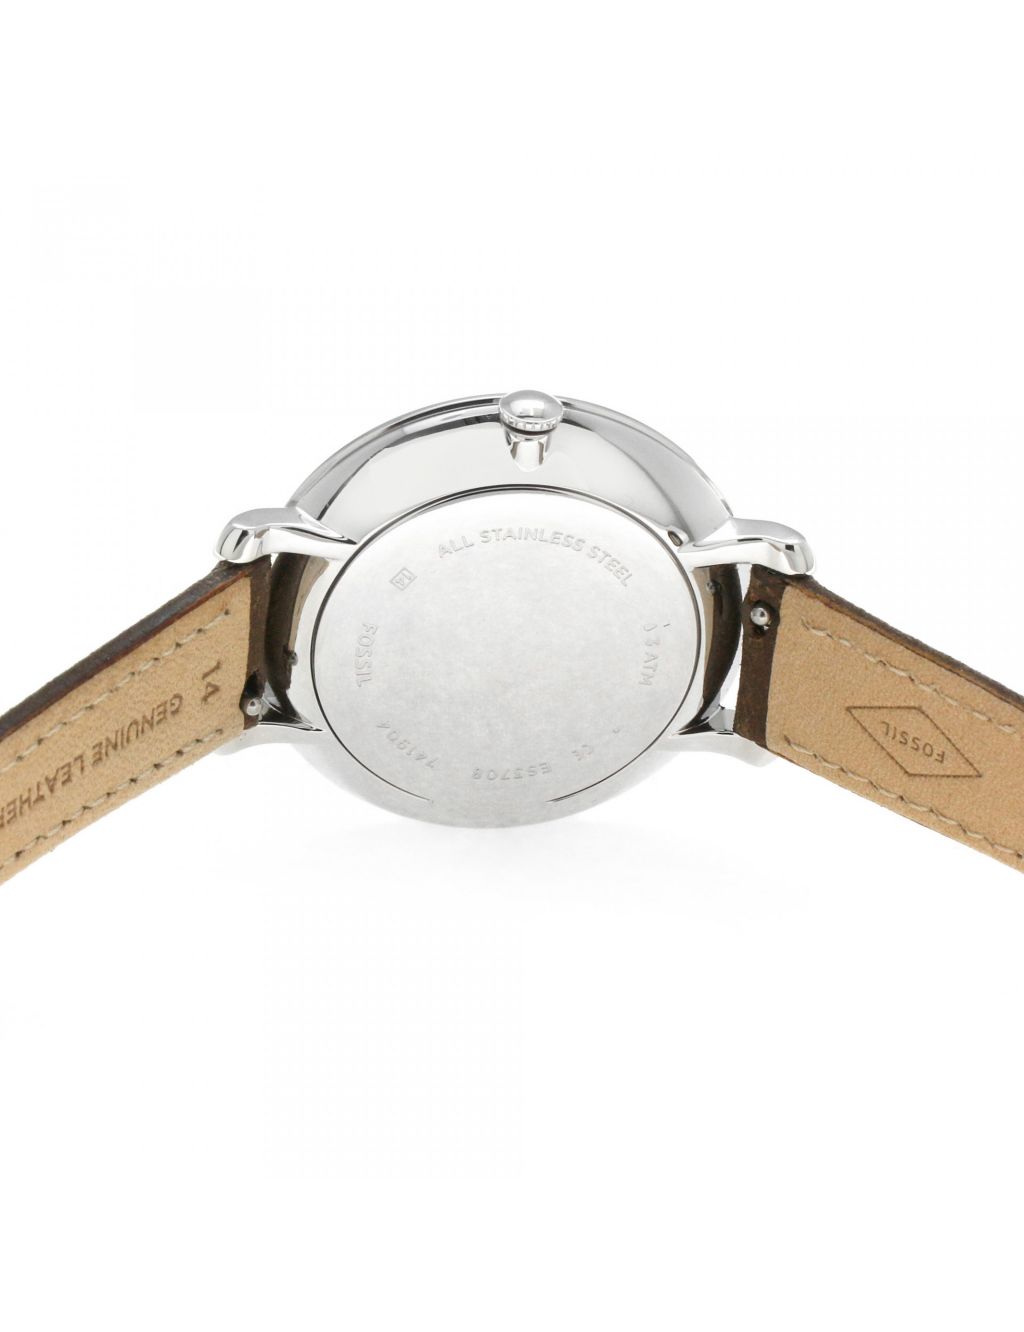 Fossil Jacqueline Brown Leather Watch image 4